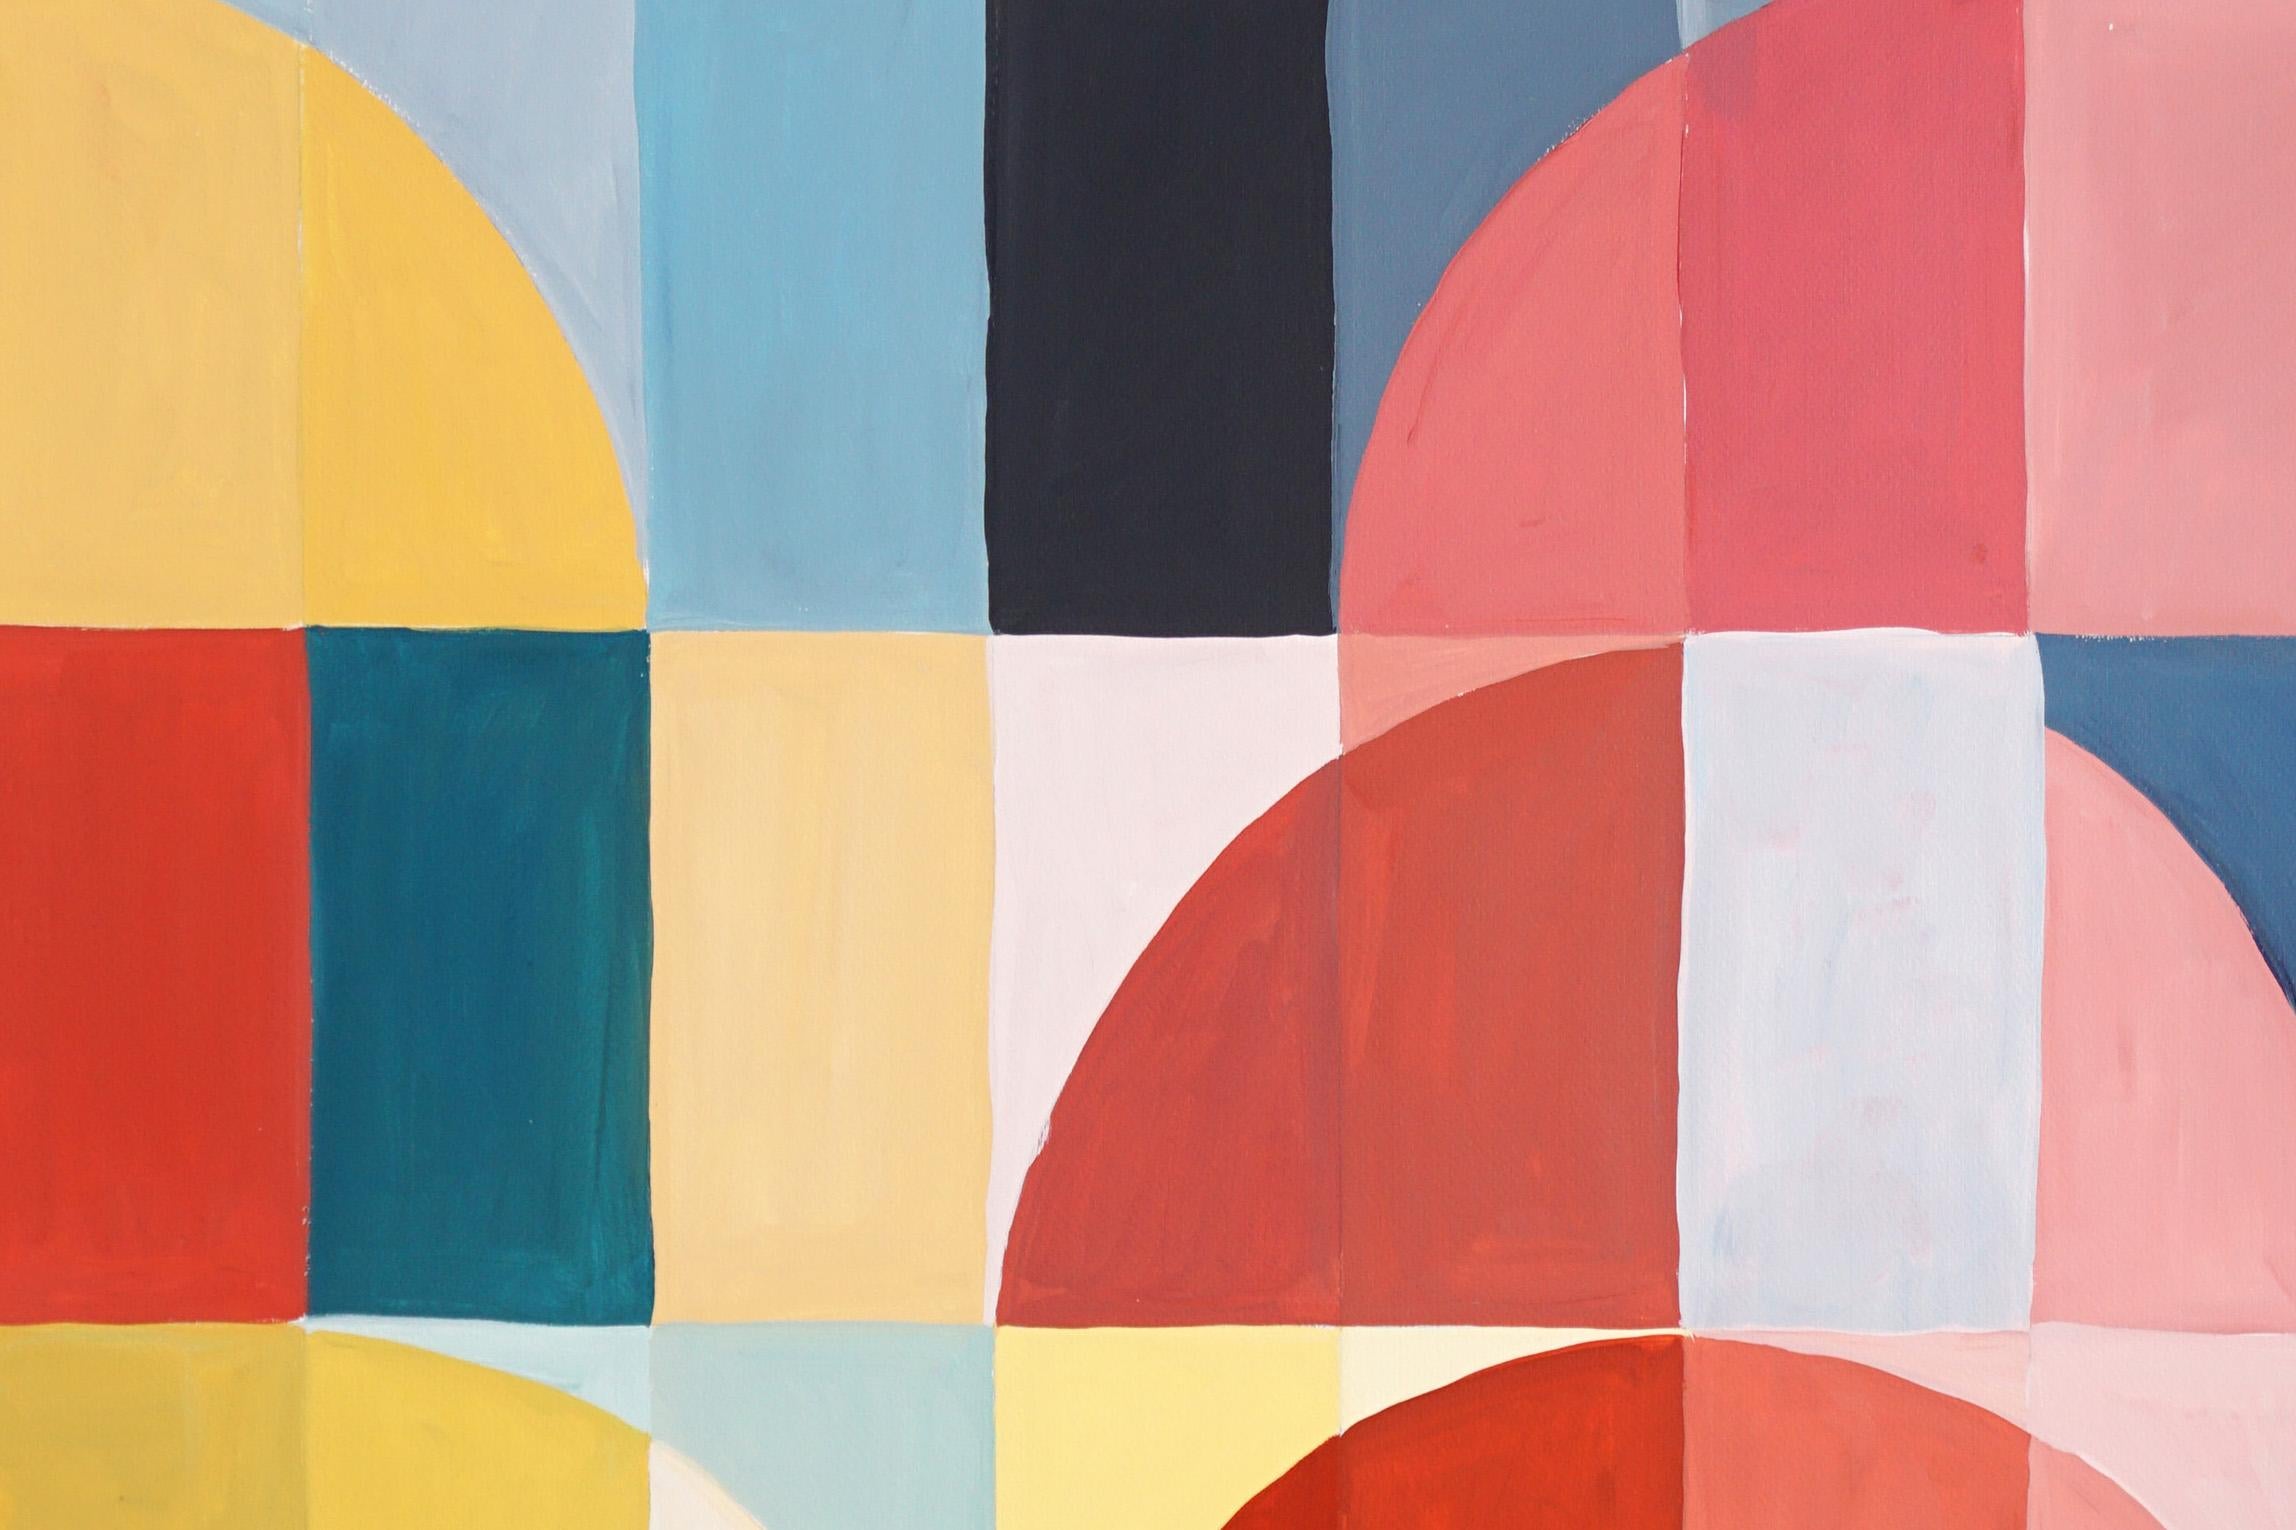 Primary Tones Arcs & Curves, Yellow, Blue and Red Bauhaus Grid, Large Triptych 3